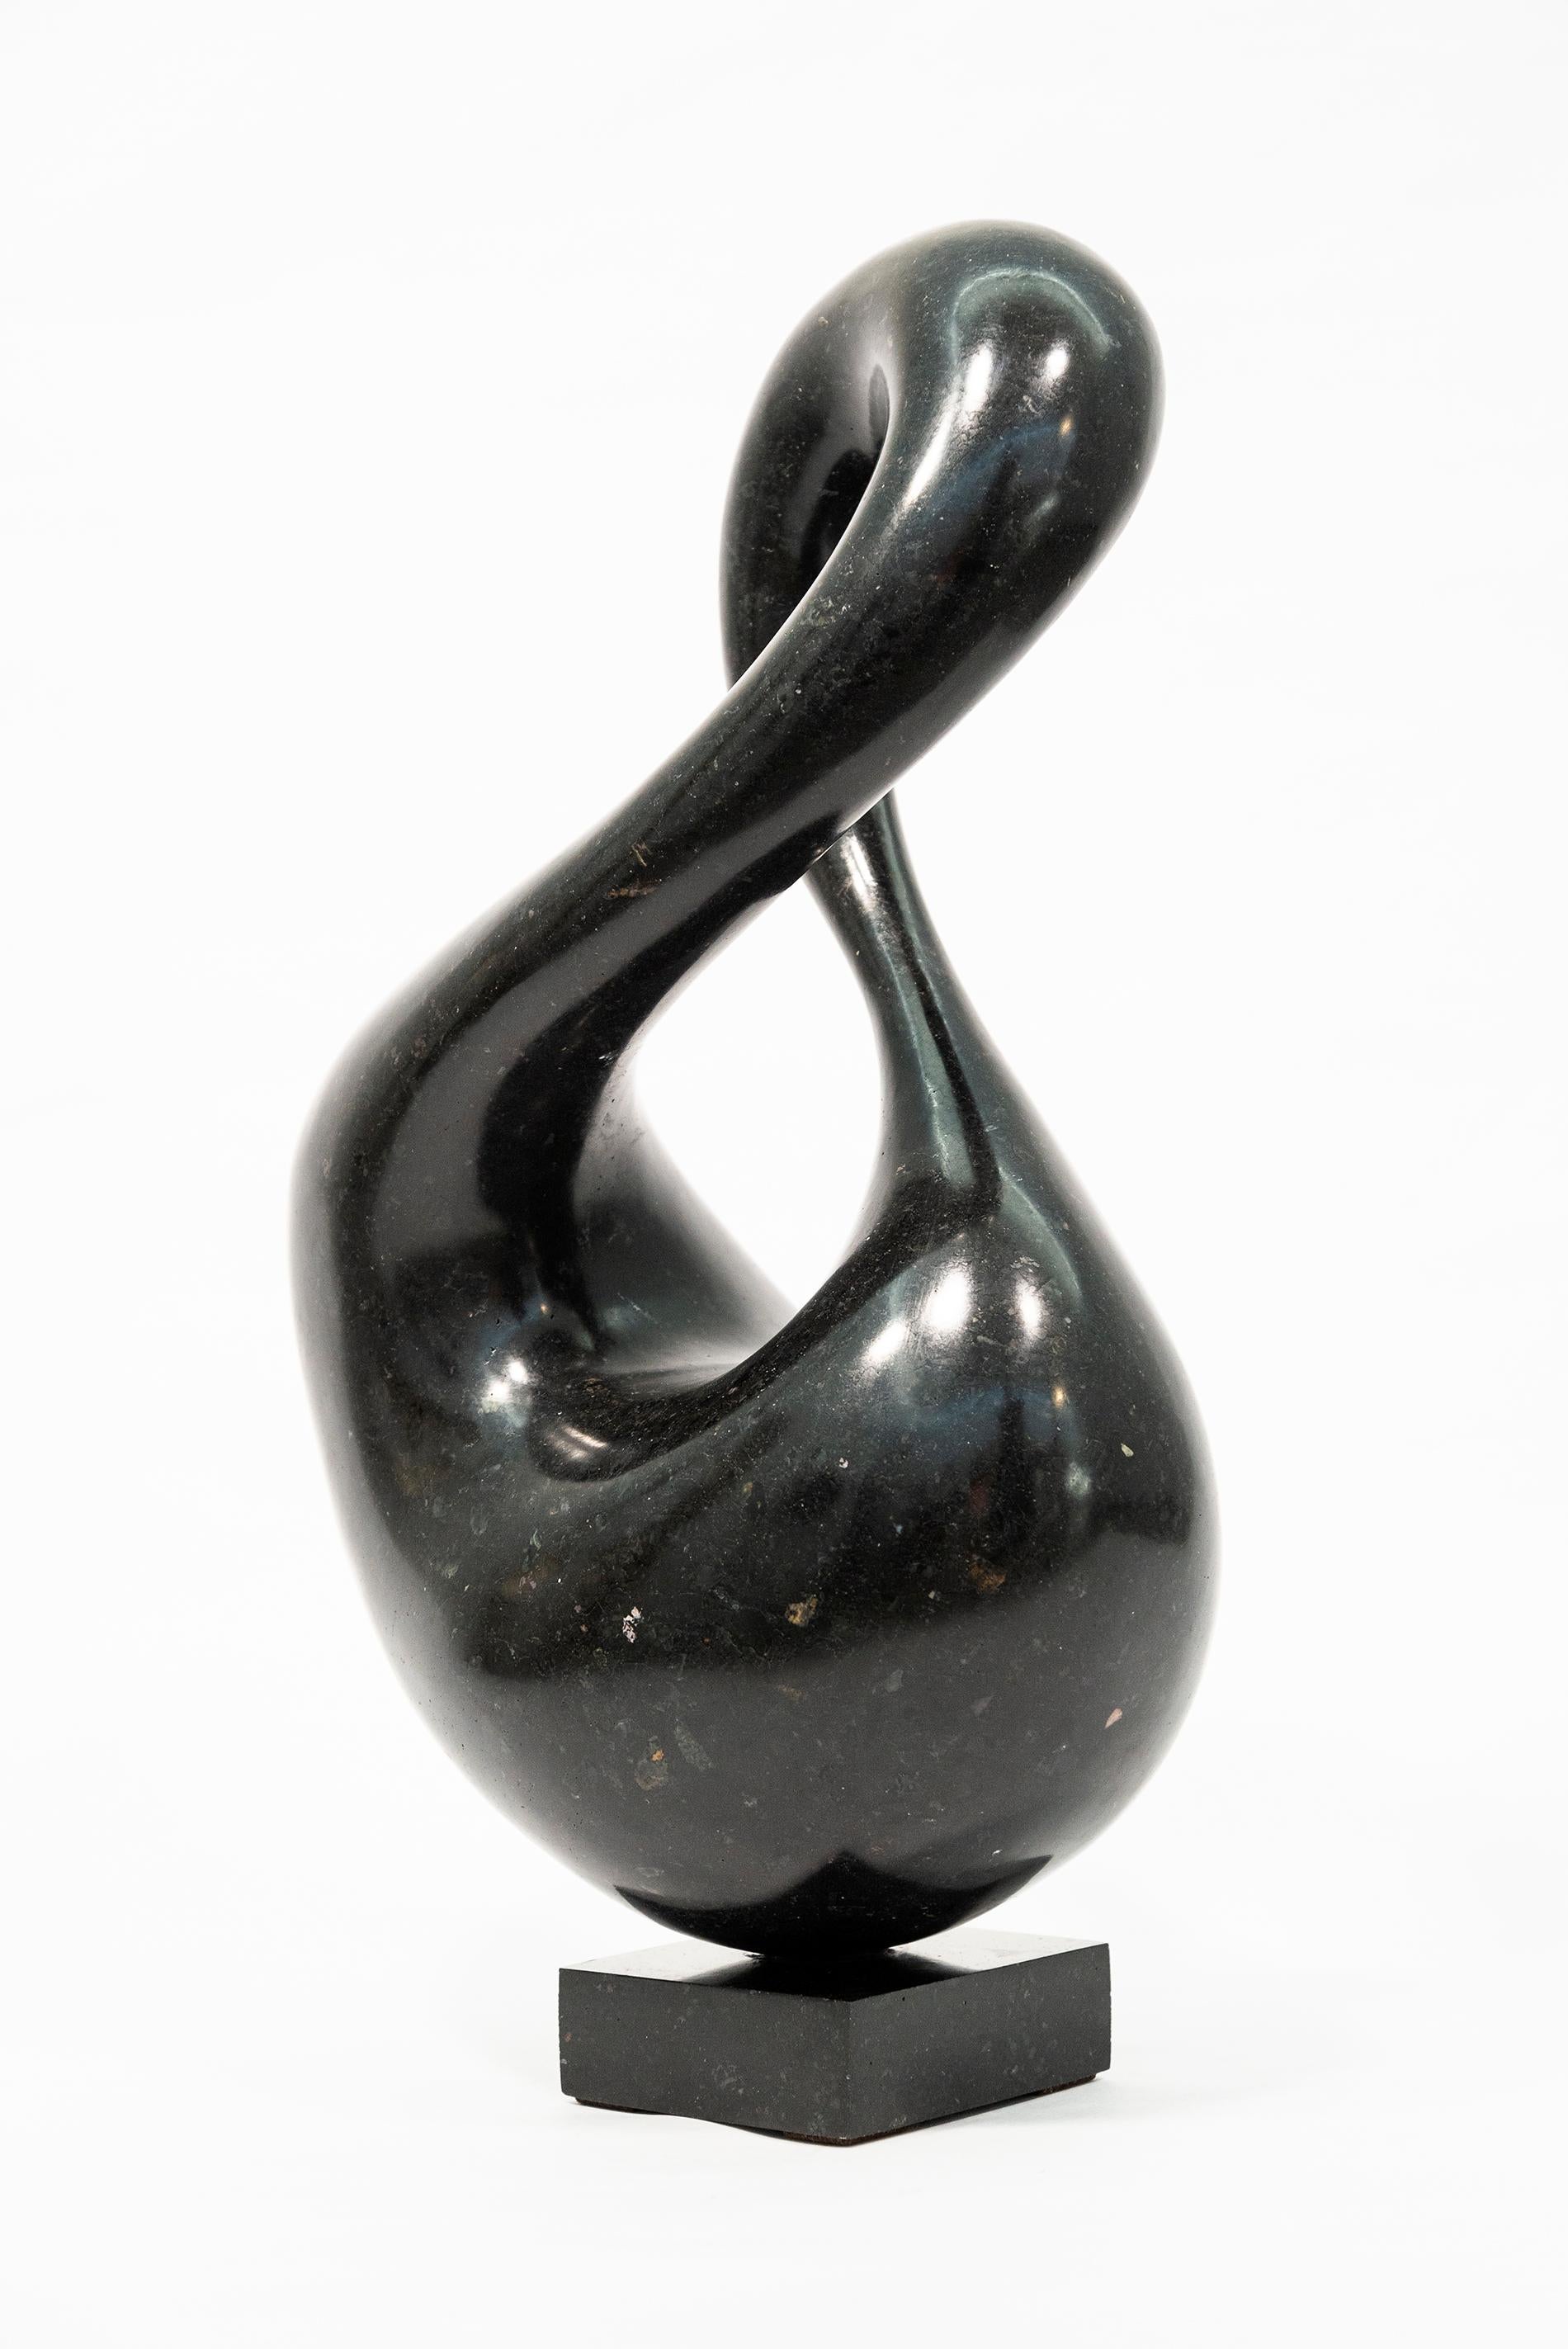 Event 3/50 - dark, smooth, polished, abstract, black granite sculpture - Contemporary Sculpture by Jeremy Guy